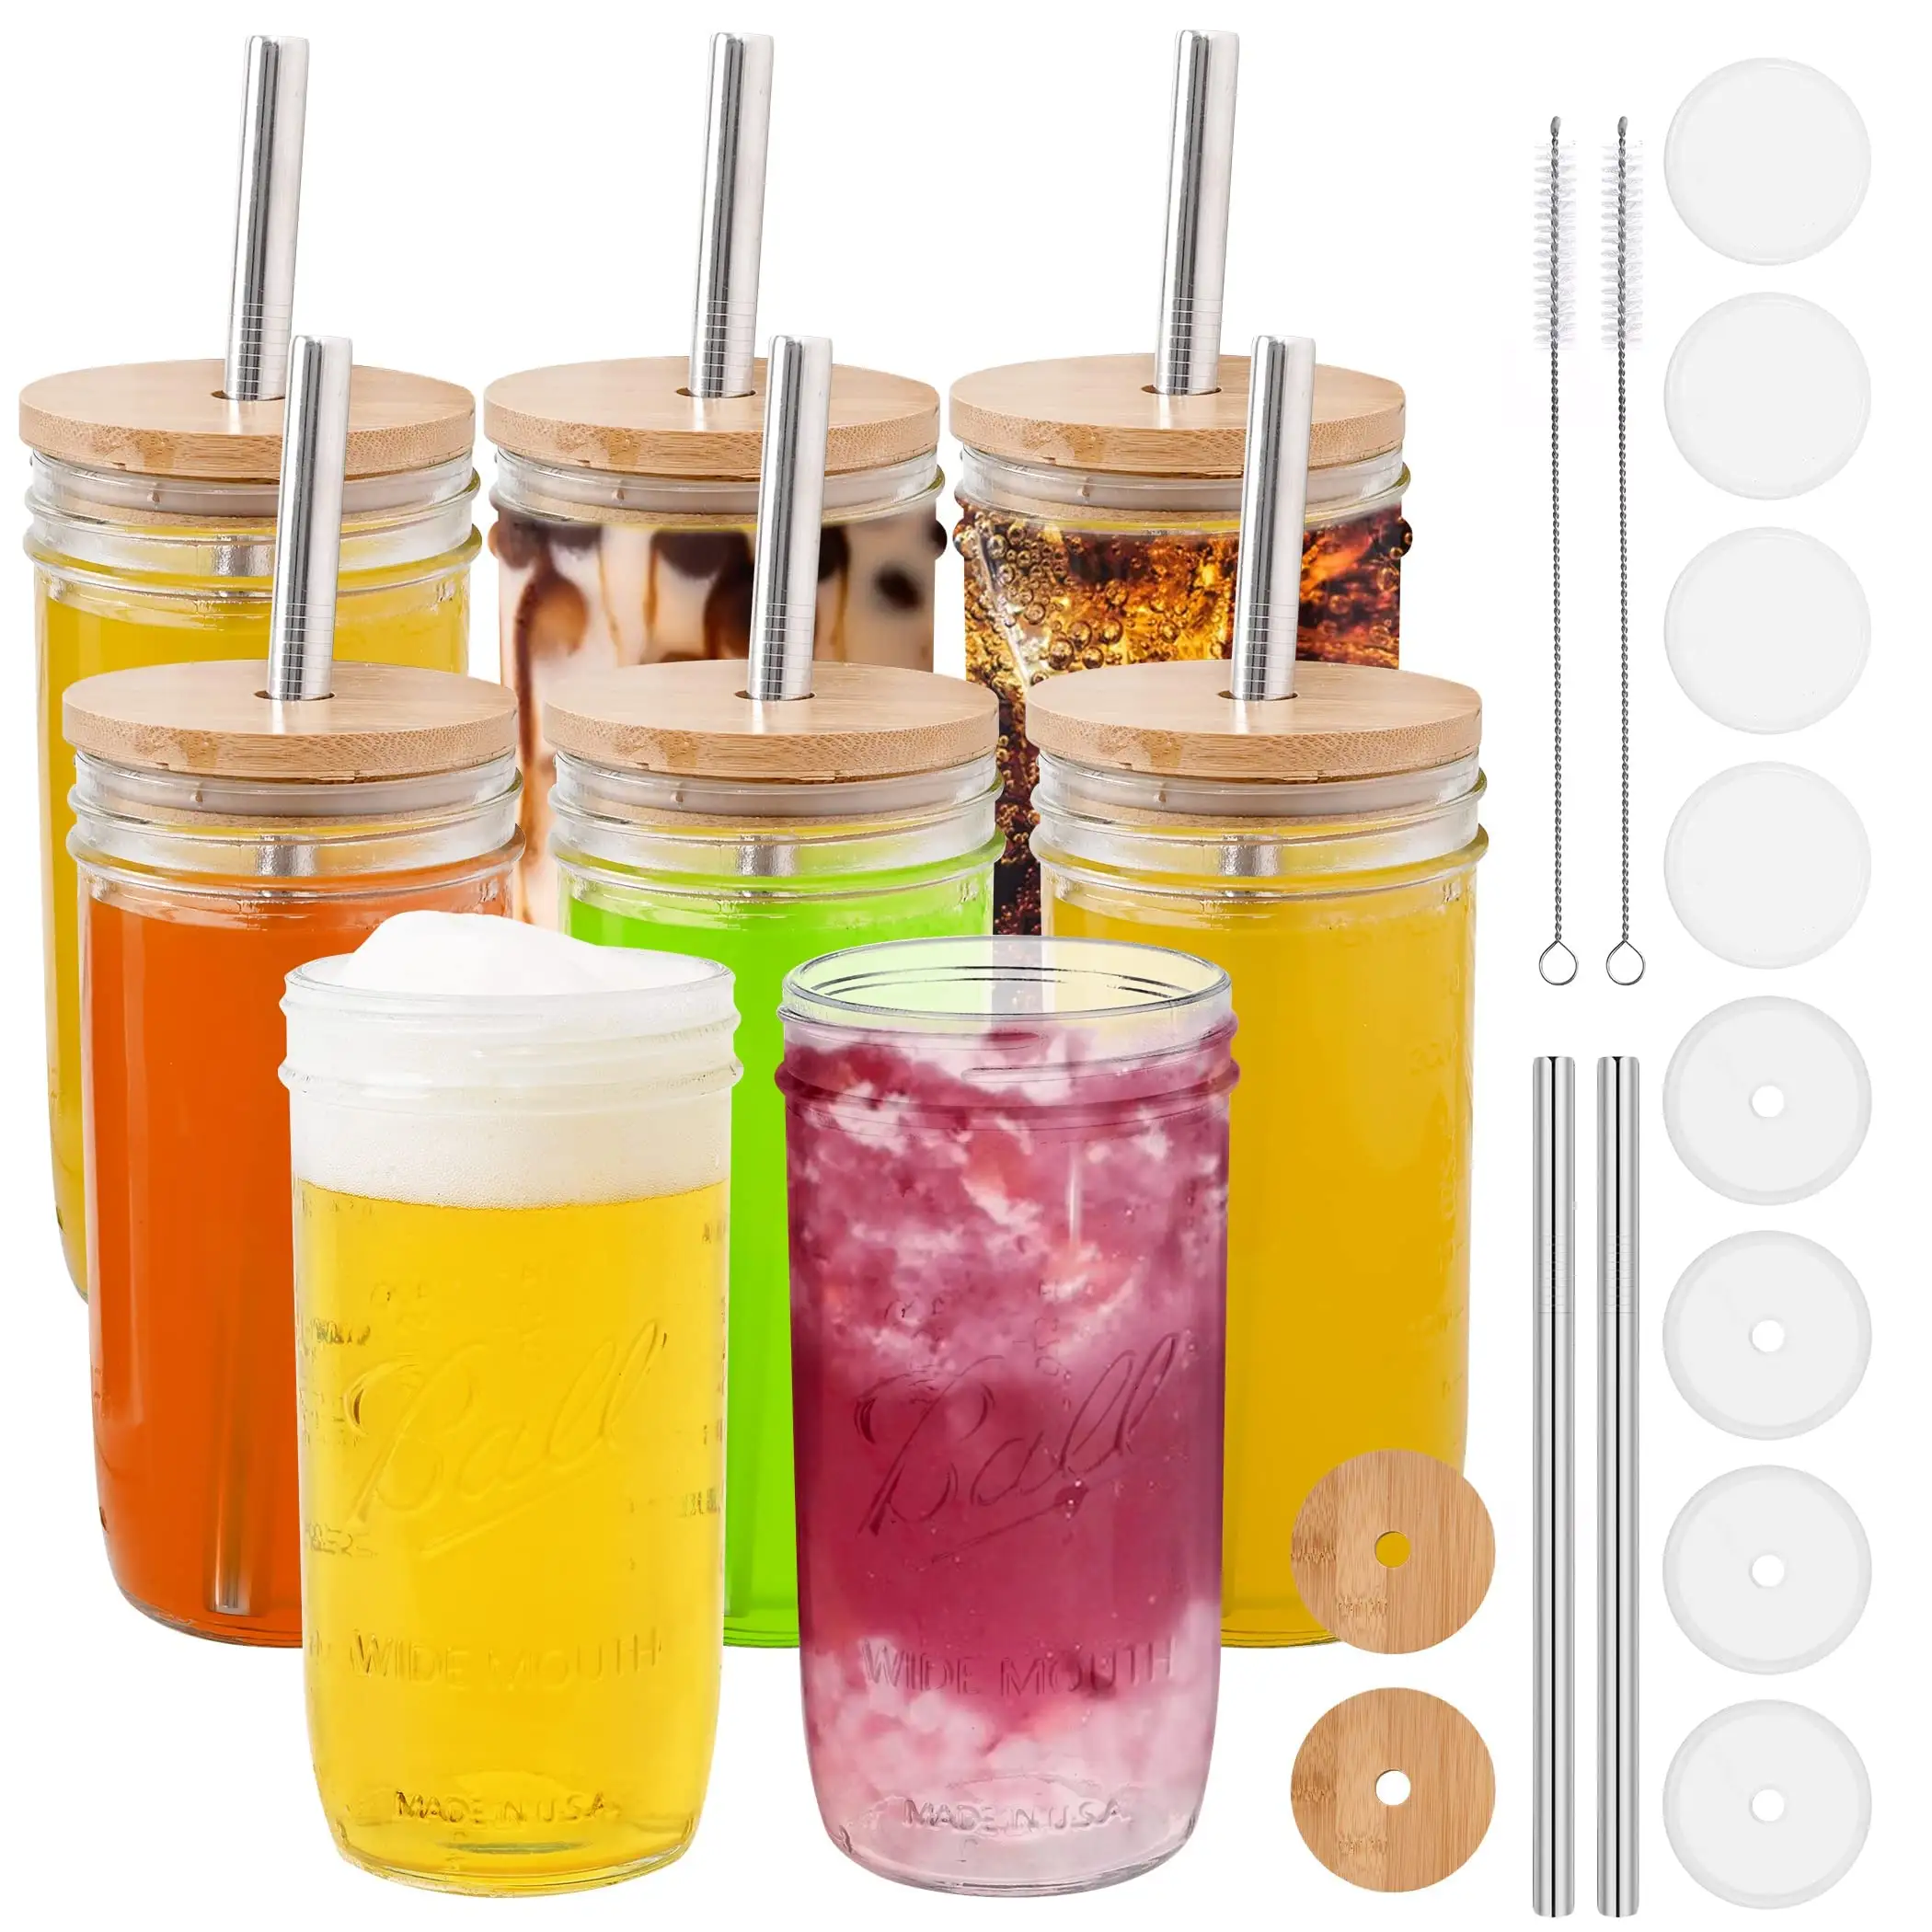 Factory Custom Logo 16oz 24oz Mason Cup Jar Water Glass Tumblers With Stainless Steel Straws and Wood Lids Bamboo Covers